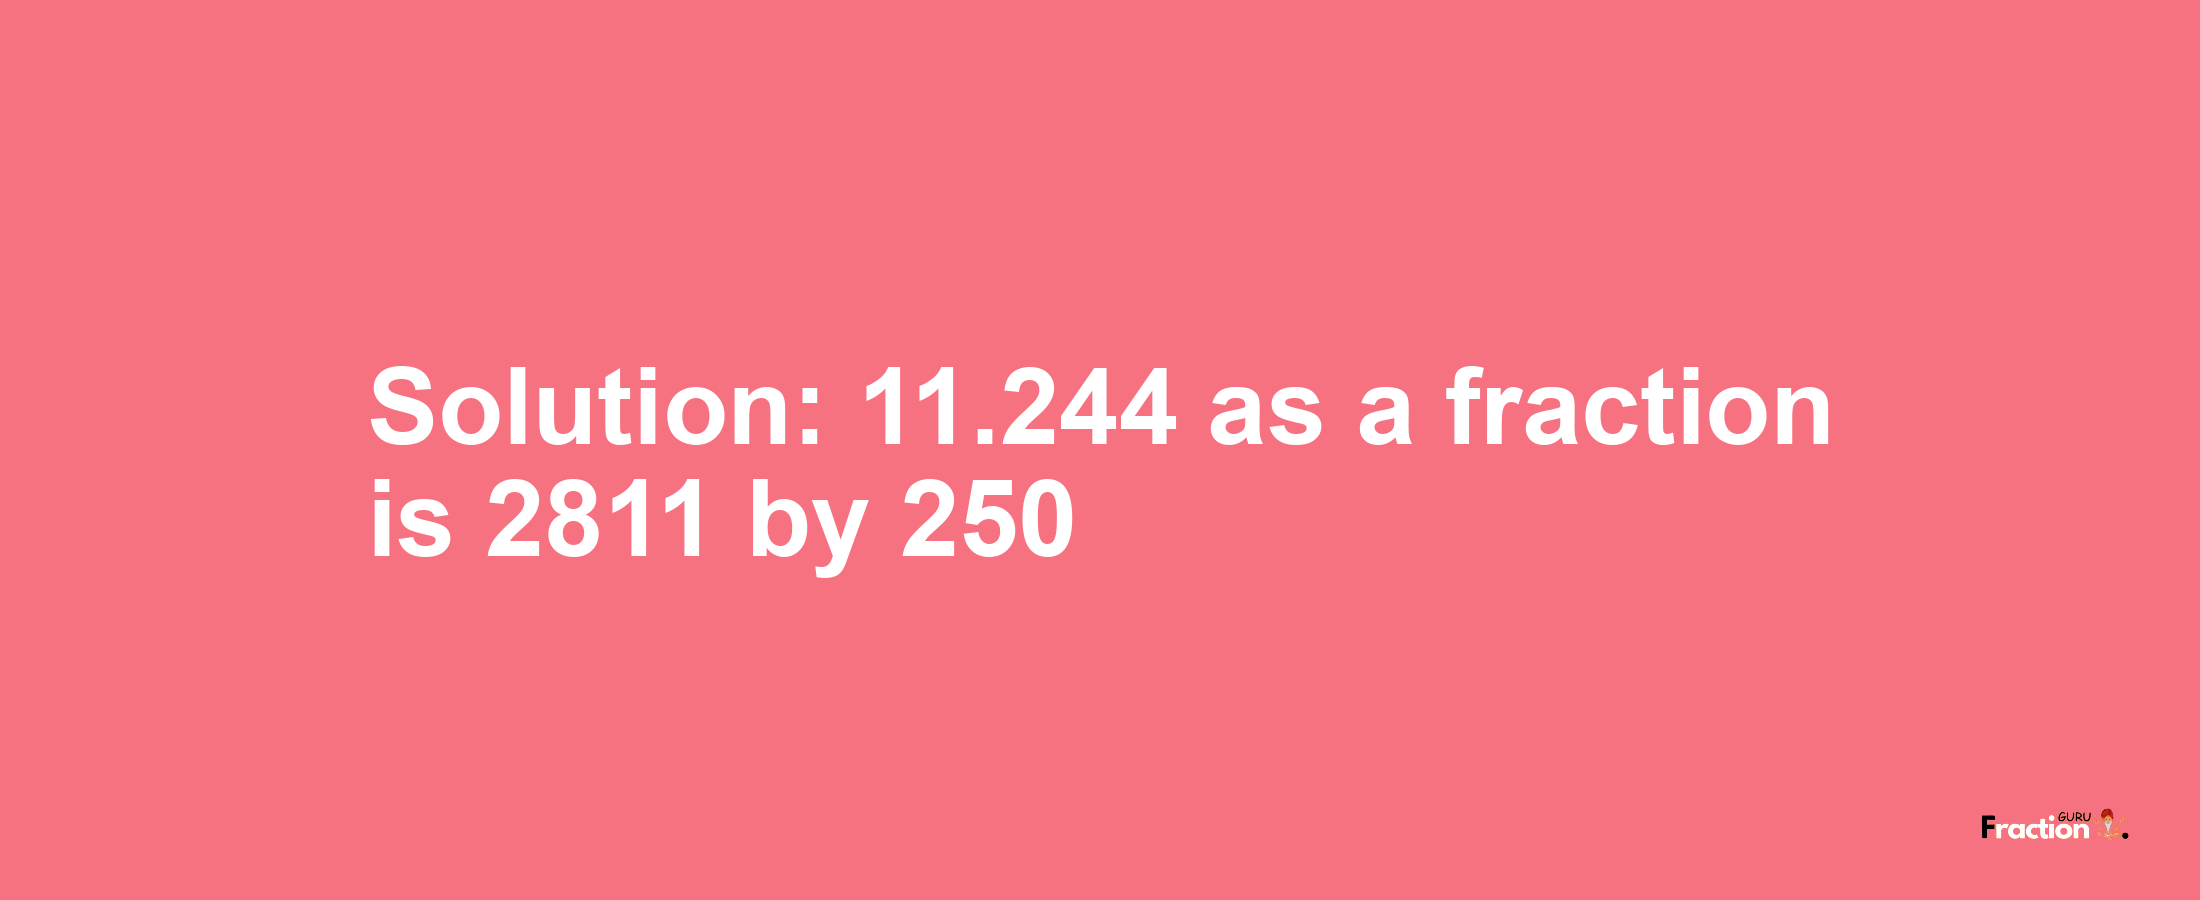 Solution:11.244 as a fraction is 2811/250